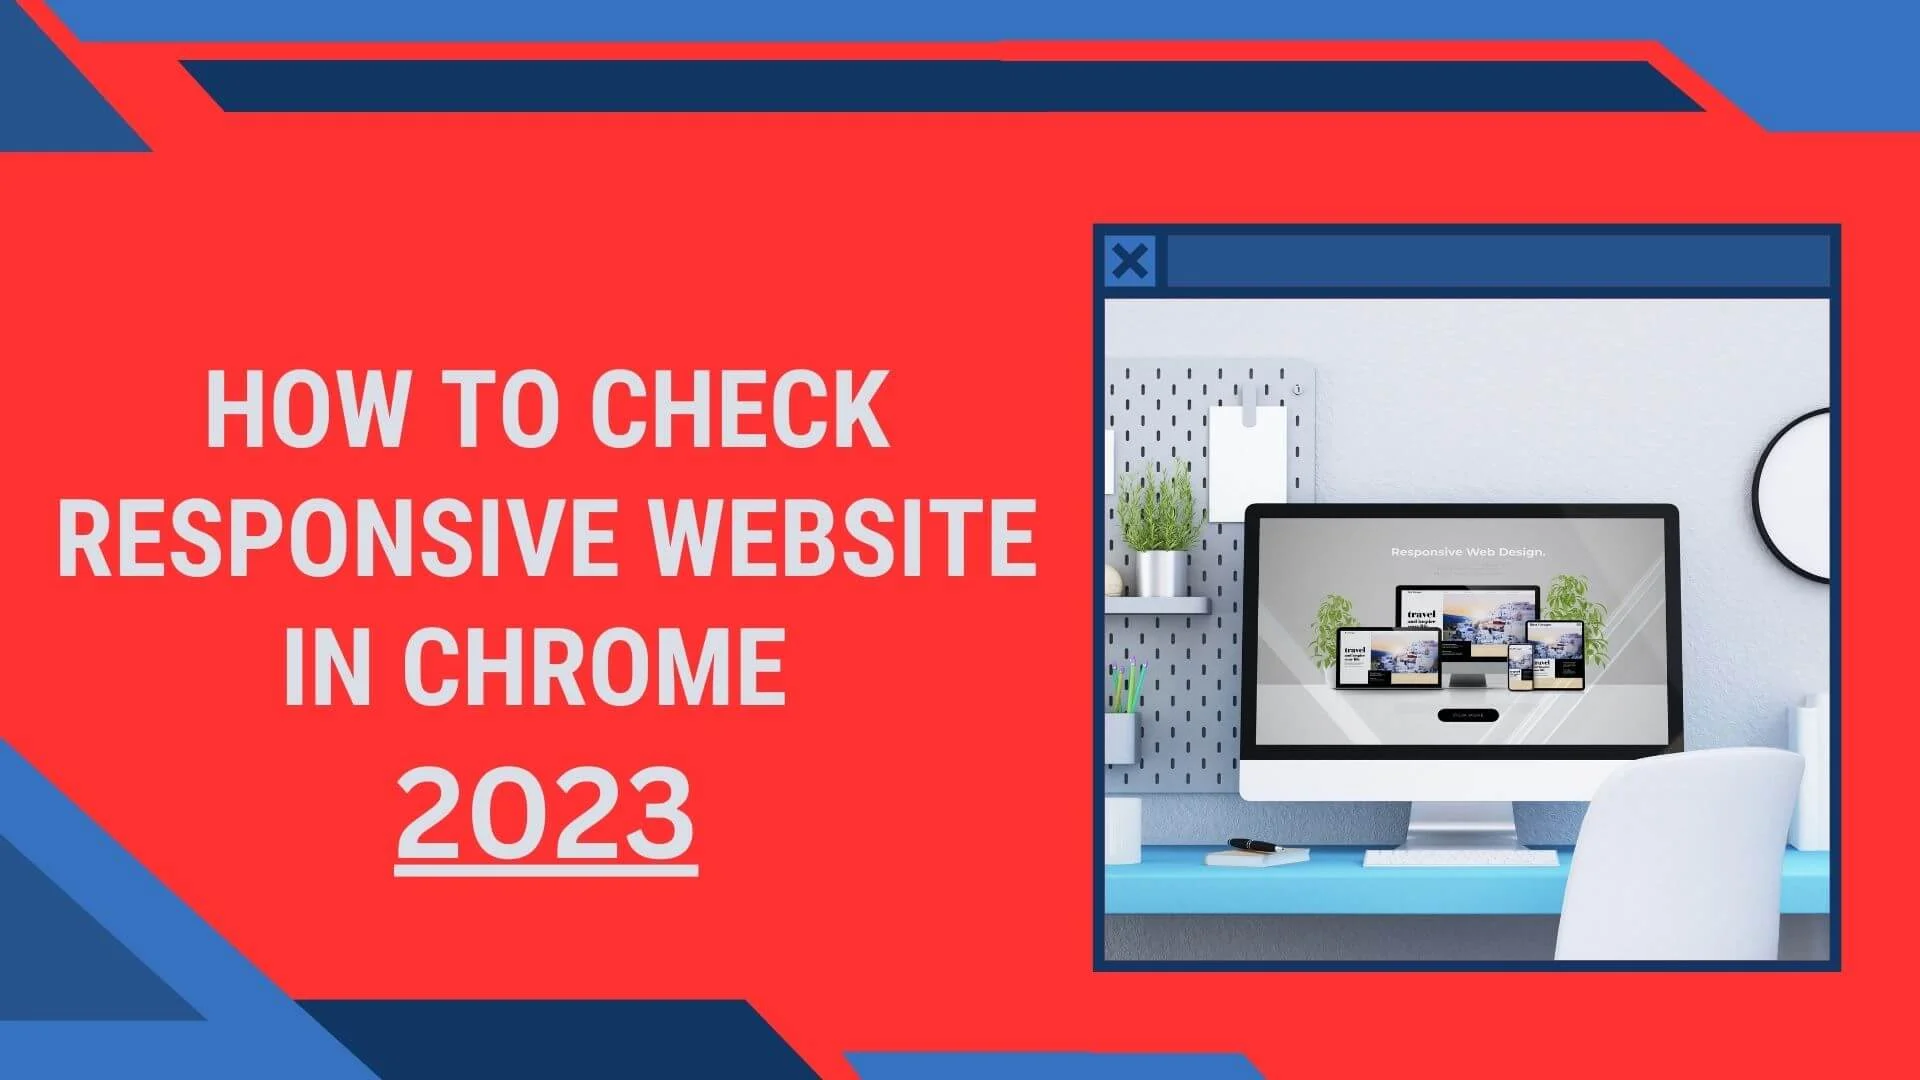 How to Check Responsive Website in Chrome in 2023 (2 Easy Ways)